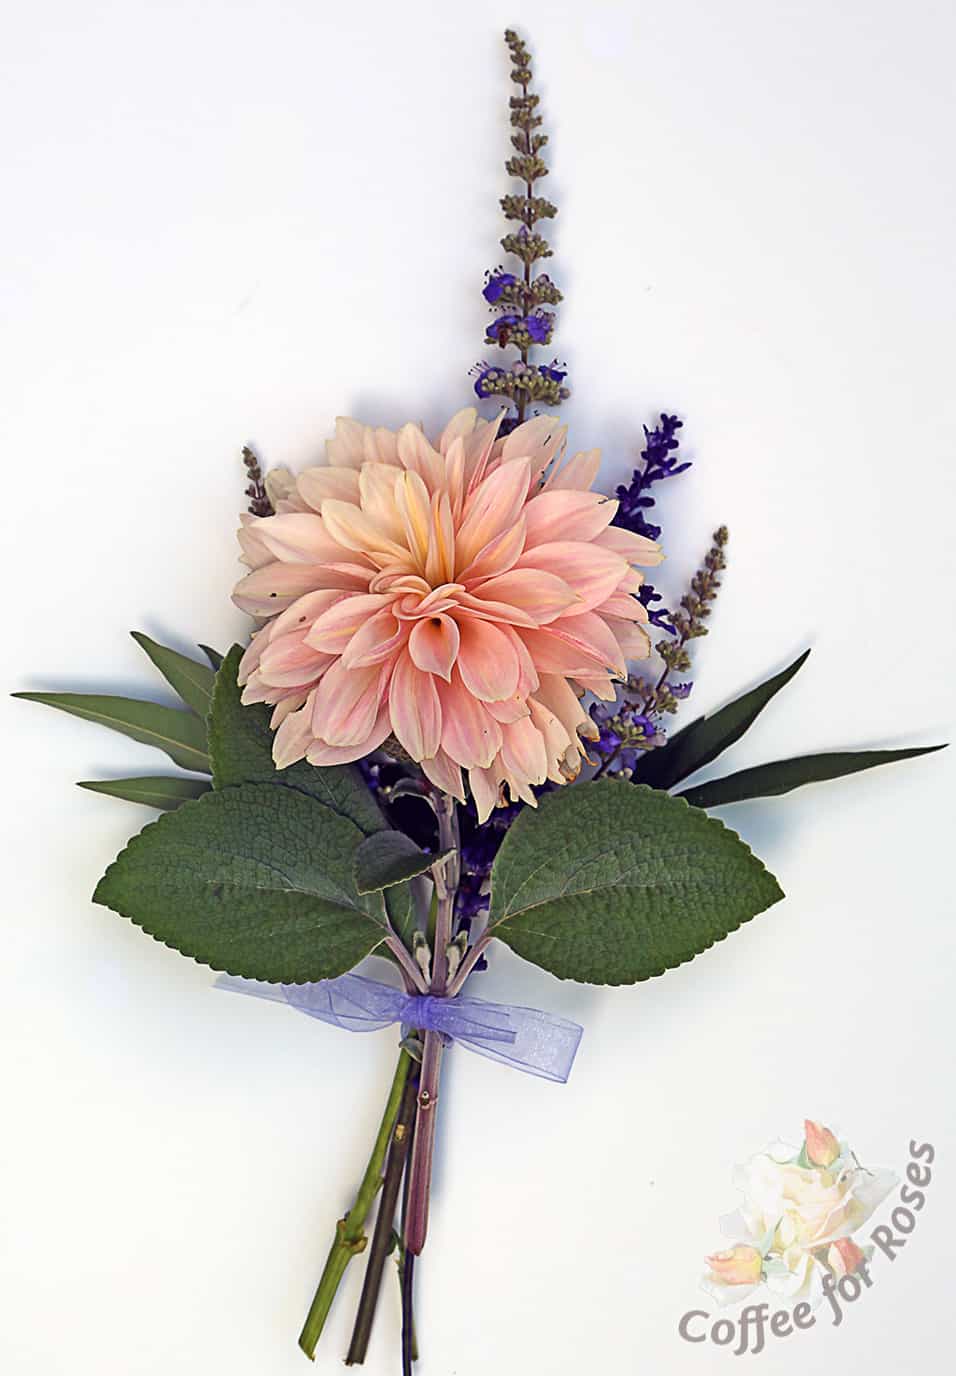 A dahlia, sage leaves, annual blue salvia and a stem from my Vitex shrub is what I used in my first bouquet, gathered on September 27th.